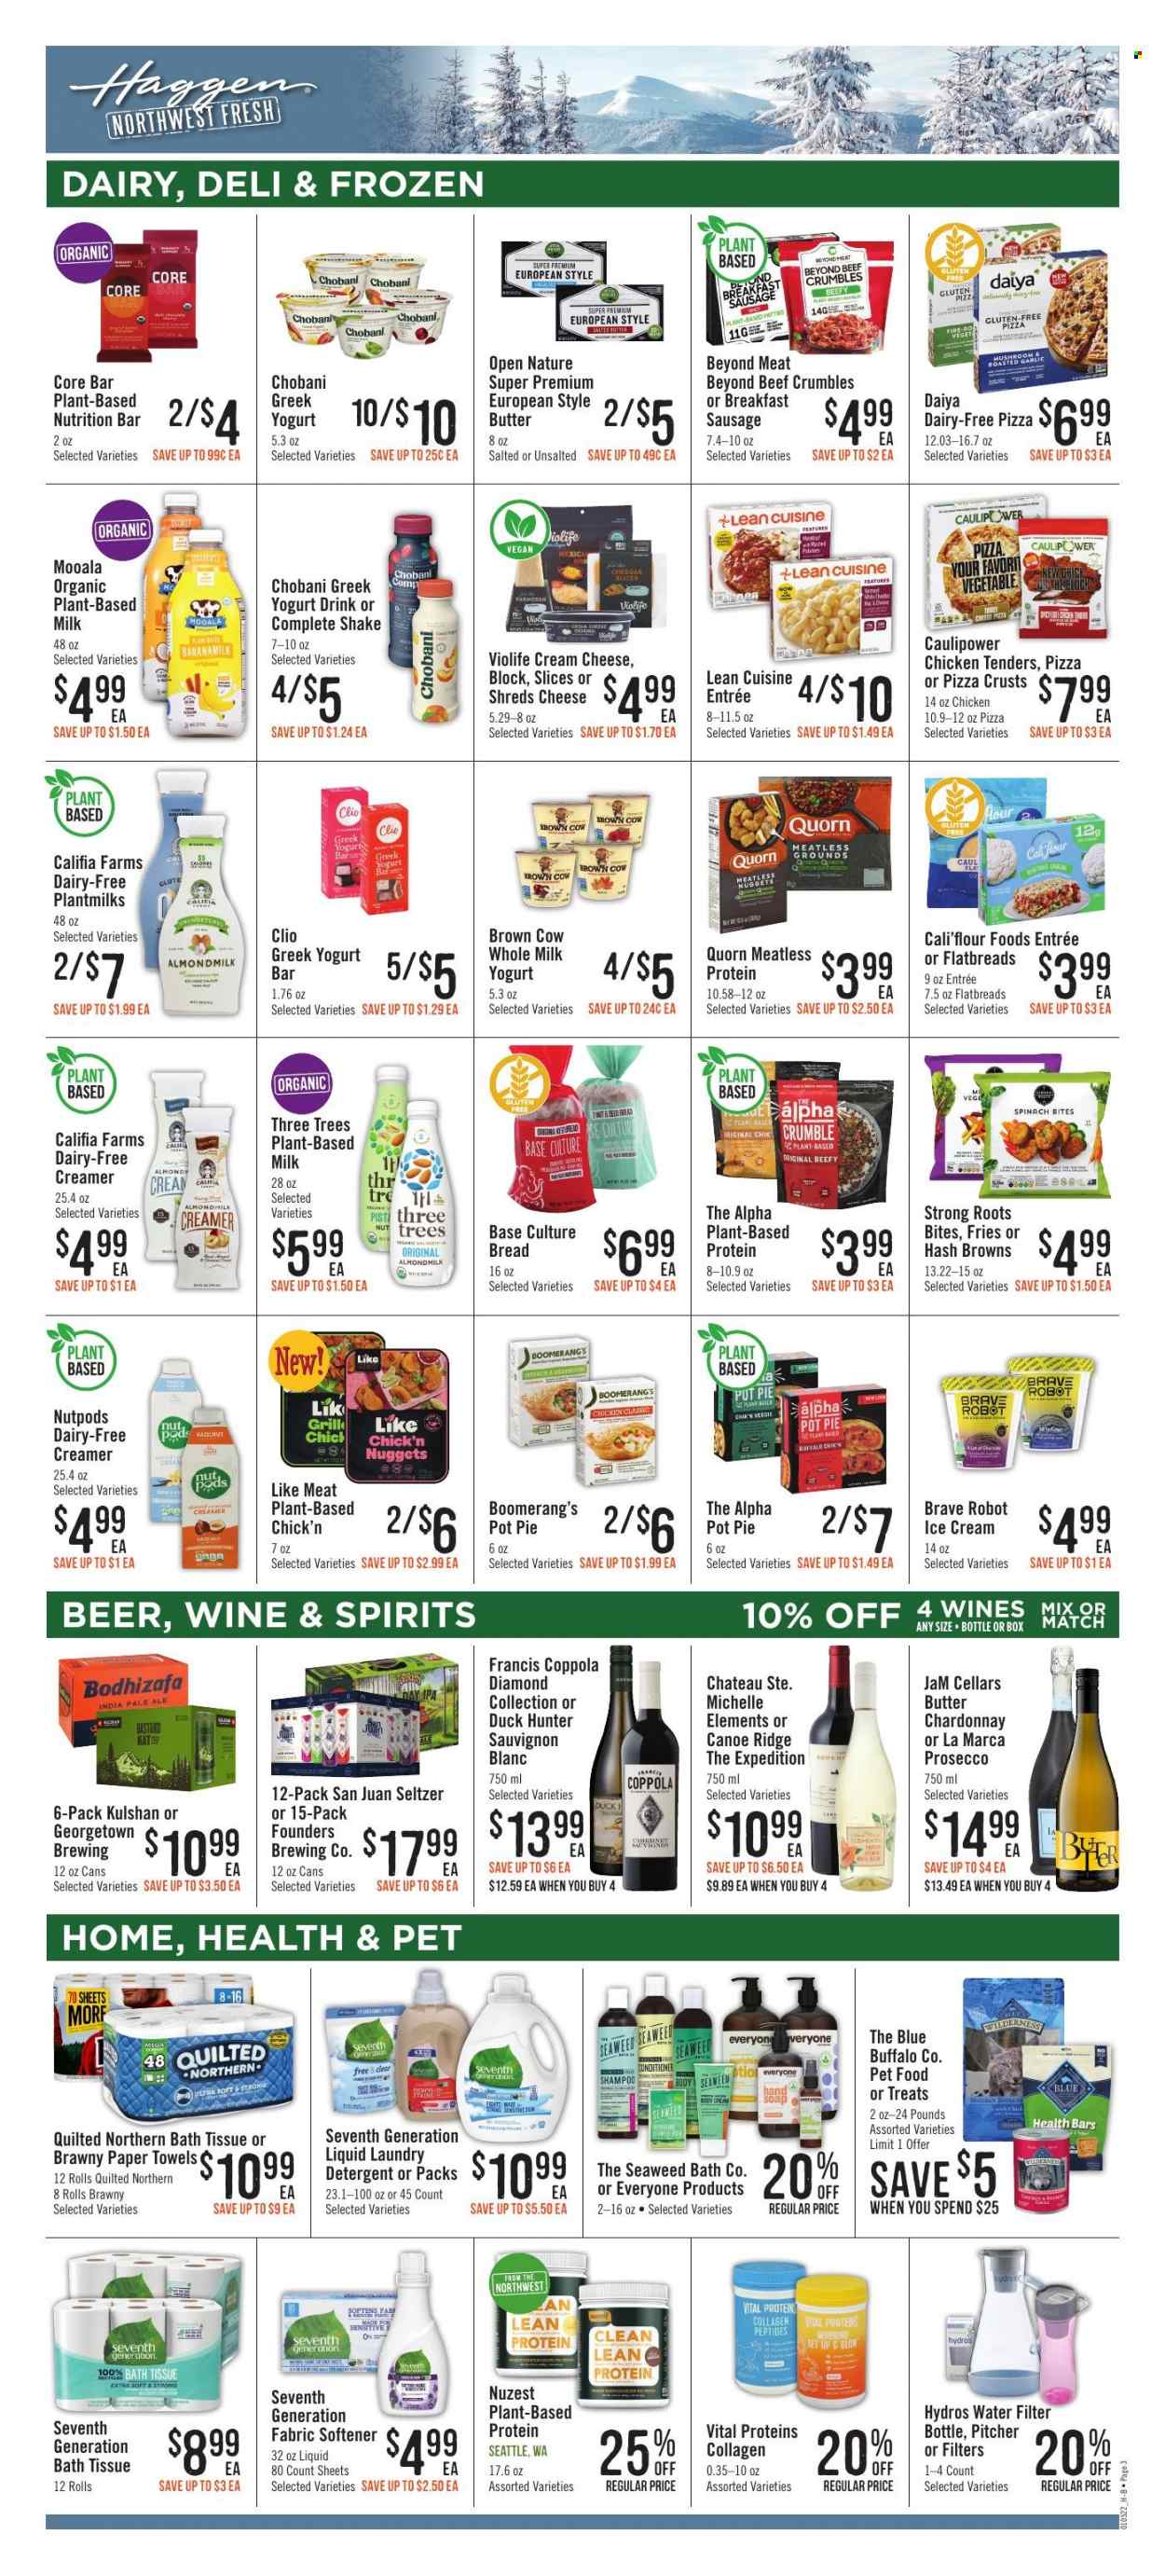 thumbnail - Haggen Flyer - 01/05/2022 - 01/18/2022 - Sales products - bread, pie, pot pie, pizza, chicken tenders, nuggets, Lean Cuisine, sausage, cream cheese, cheddar, parmesan, greek yoghurt, Chobani, almond milk, milk, yoghurt drink, shake, butter, creamer, ice cream, hash browns, potato fries, flour, seltzer water, white wine, prosecco, Chardonnay, wine, Sauvignon Blanc, beer, bath tissue, Quilted Northern, kitchen towels, paper towels, detergent, fabric softener, laundry detergent, shampoo, hand soap, soap, conditioner, water filter, animal food, Blue Buffalo, pot, Vital Proteins. Page 3.